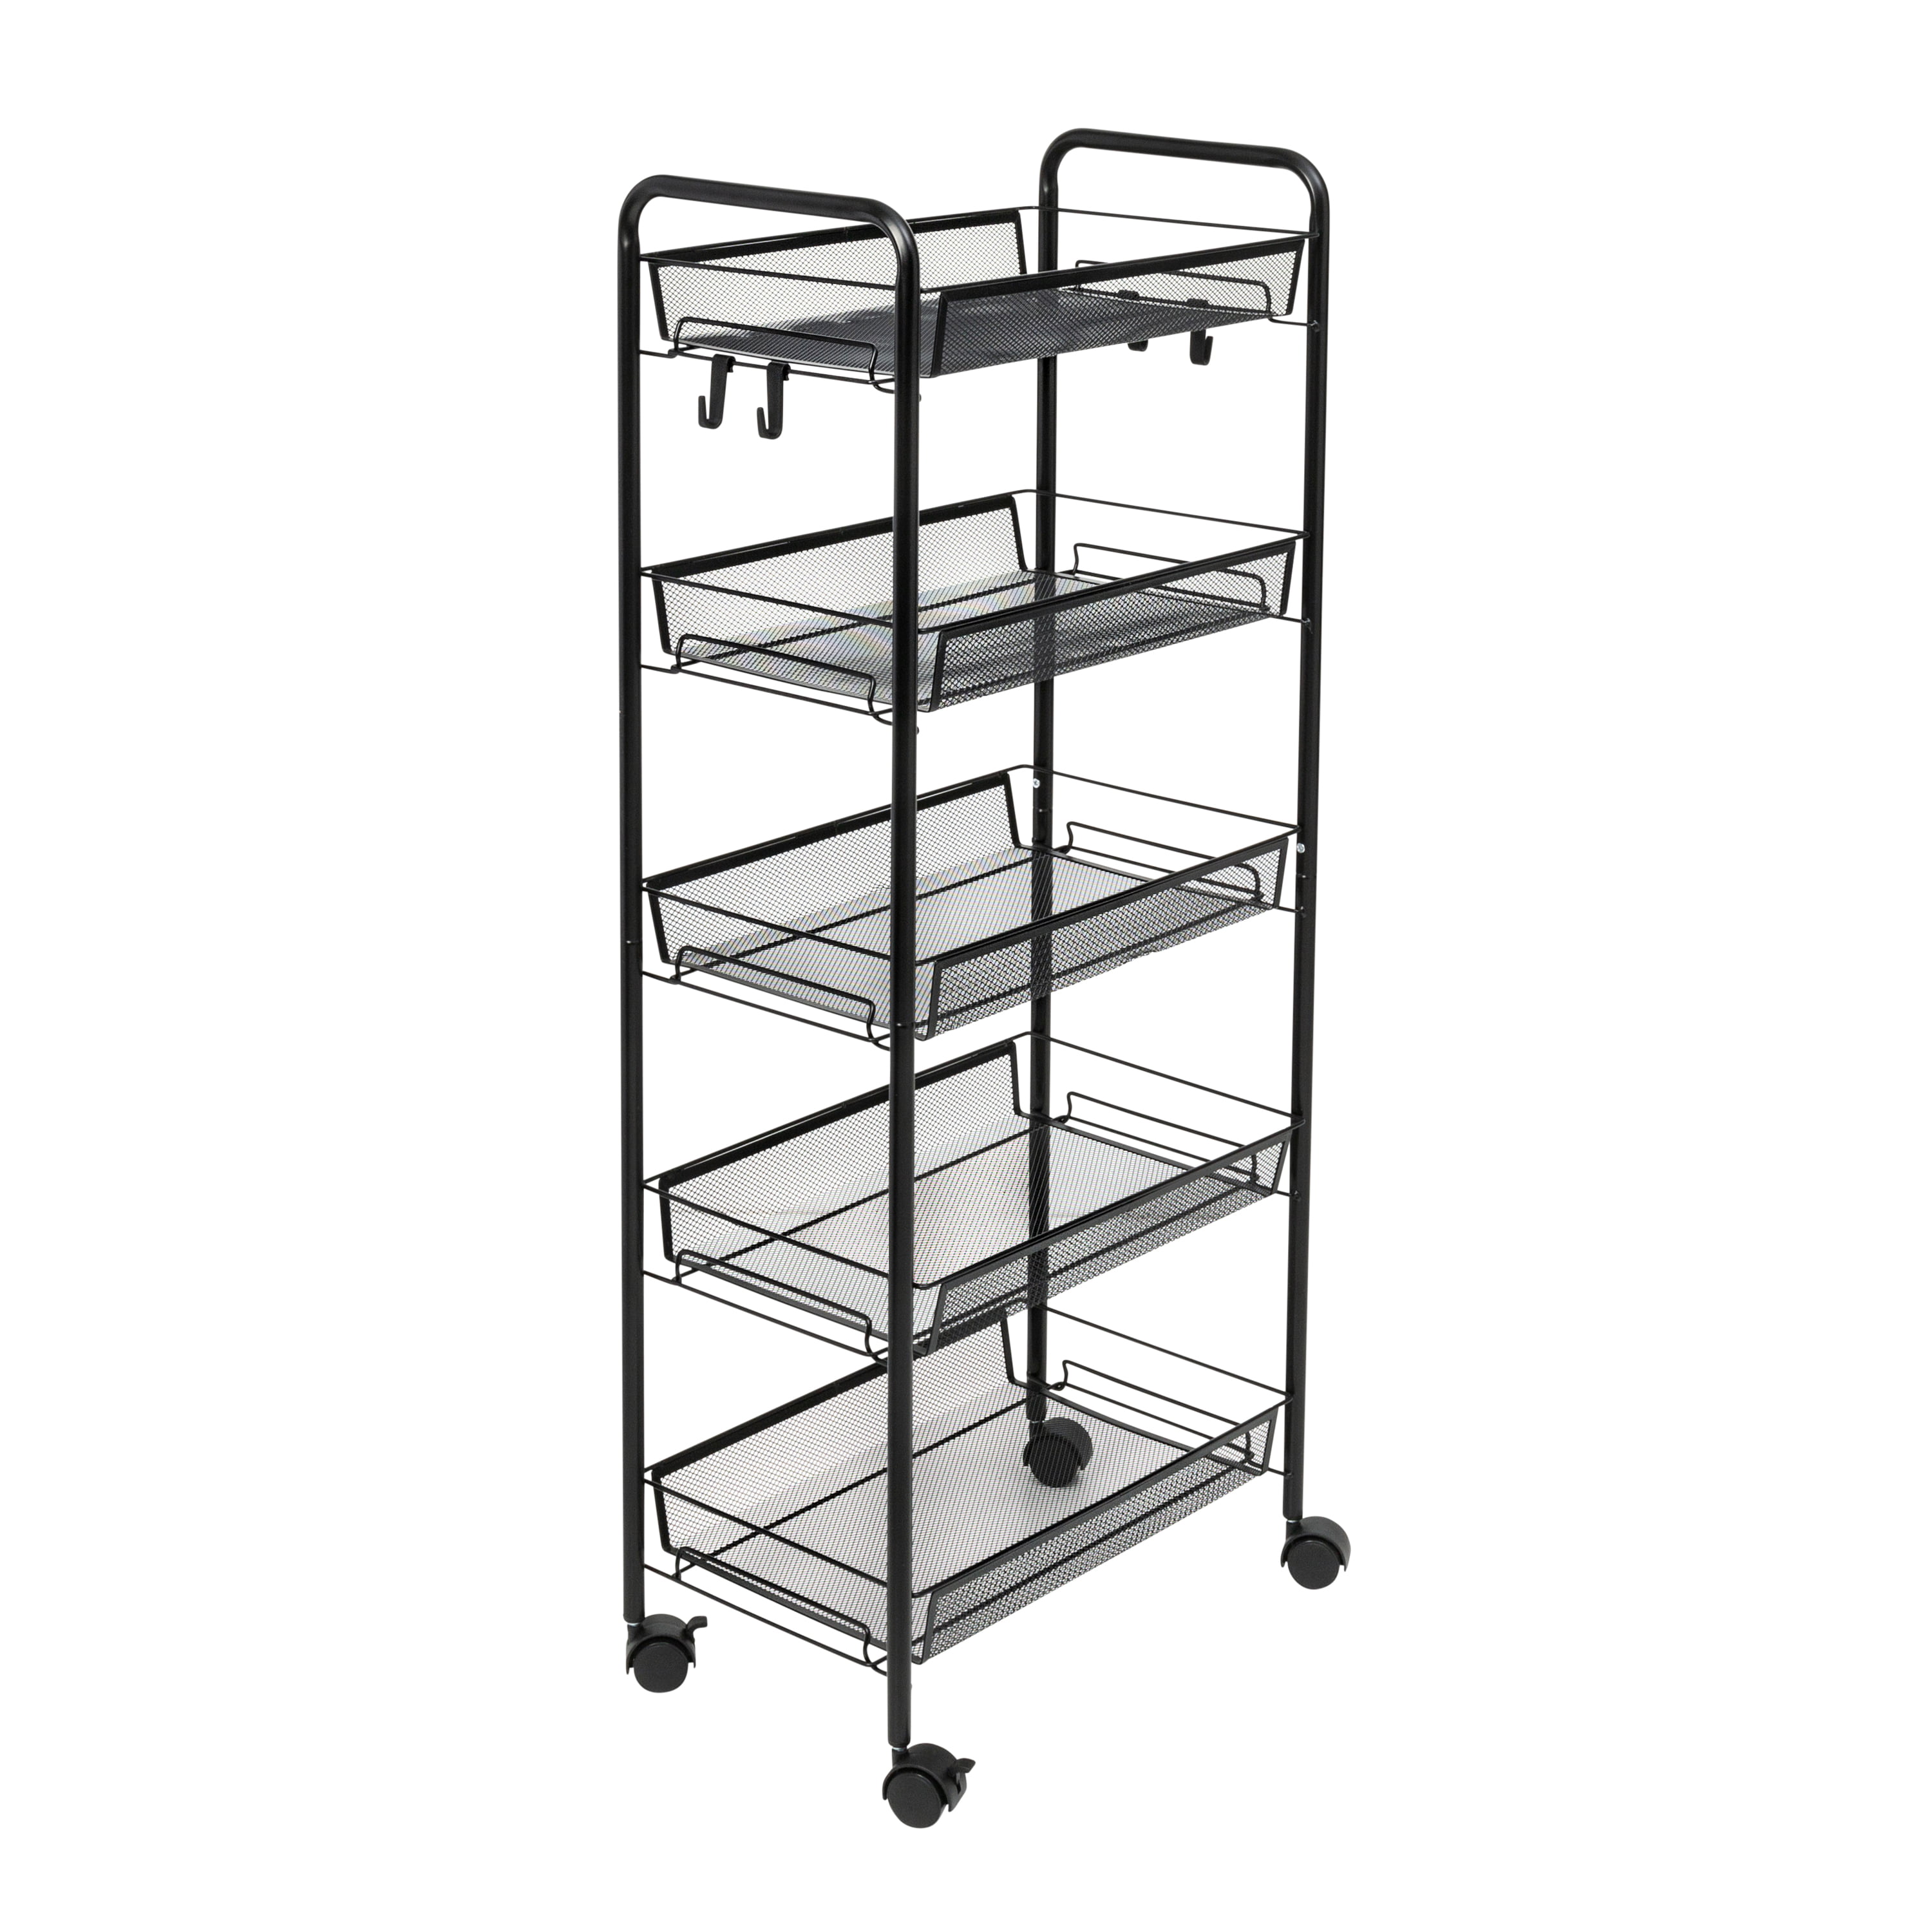 Honey-Can-Do Steel 5-Tier Rolling Storage Cart with 4 Hooks, Black - image 2 of 10